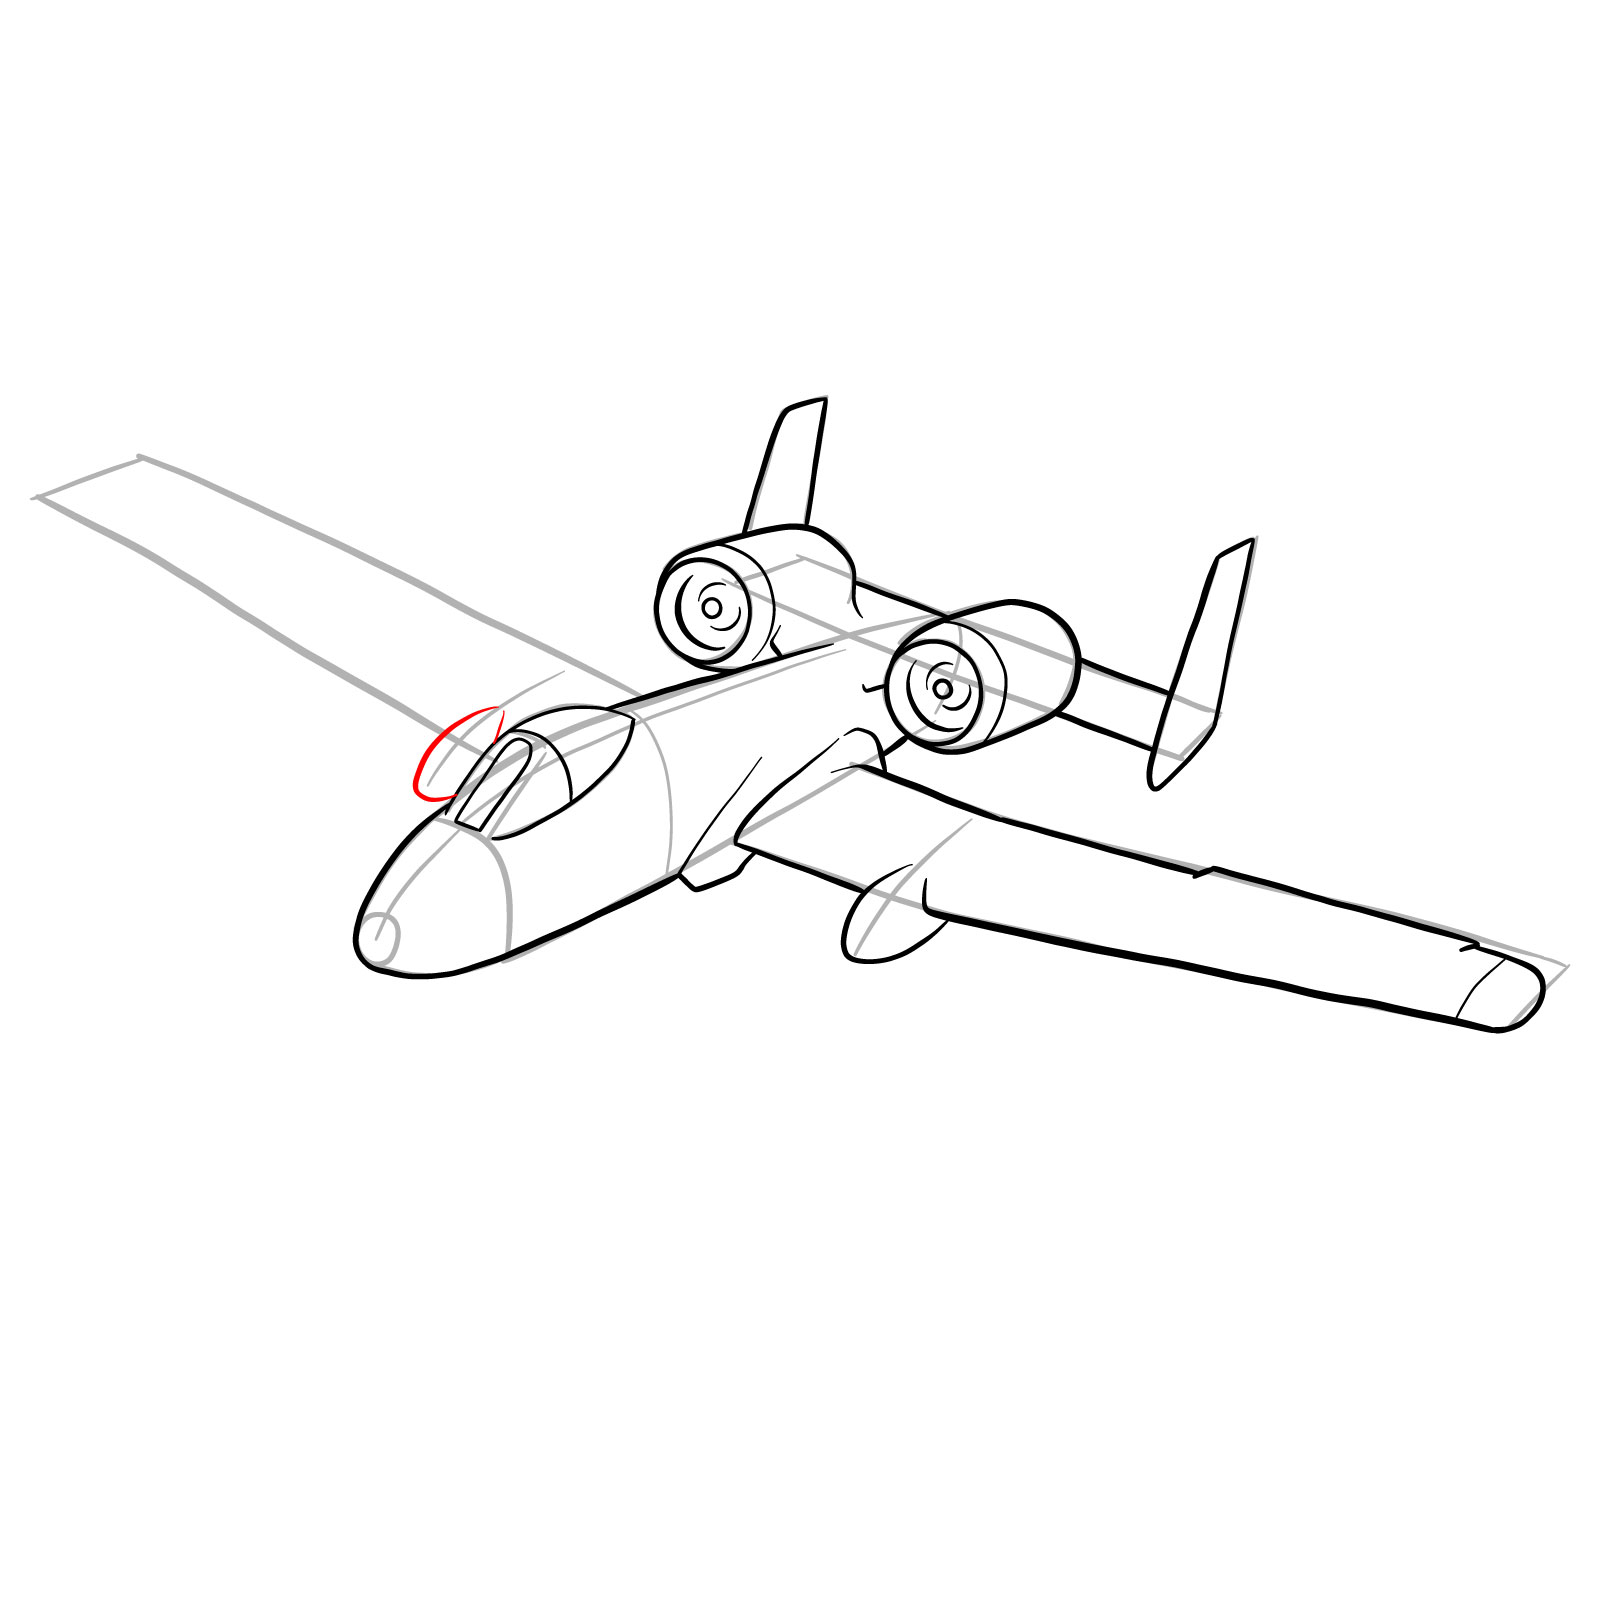 How to draw A-10 Thunderbolt II - step 20